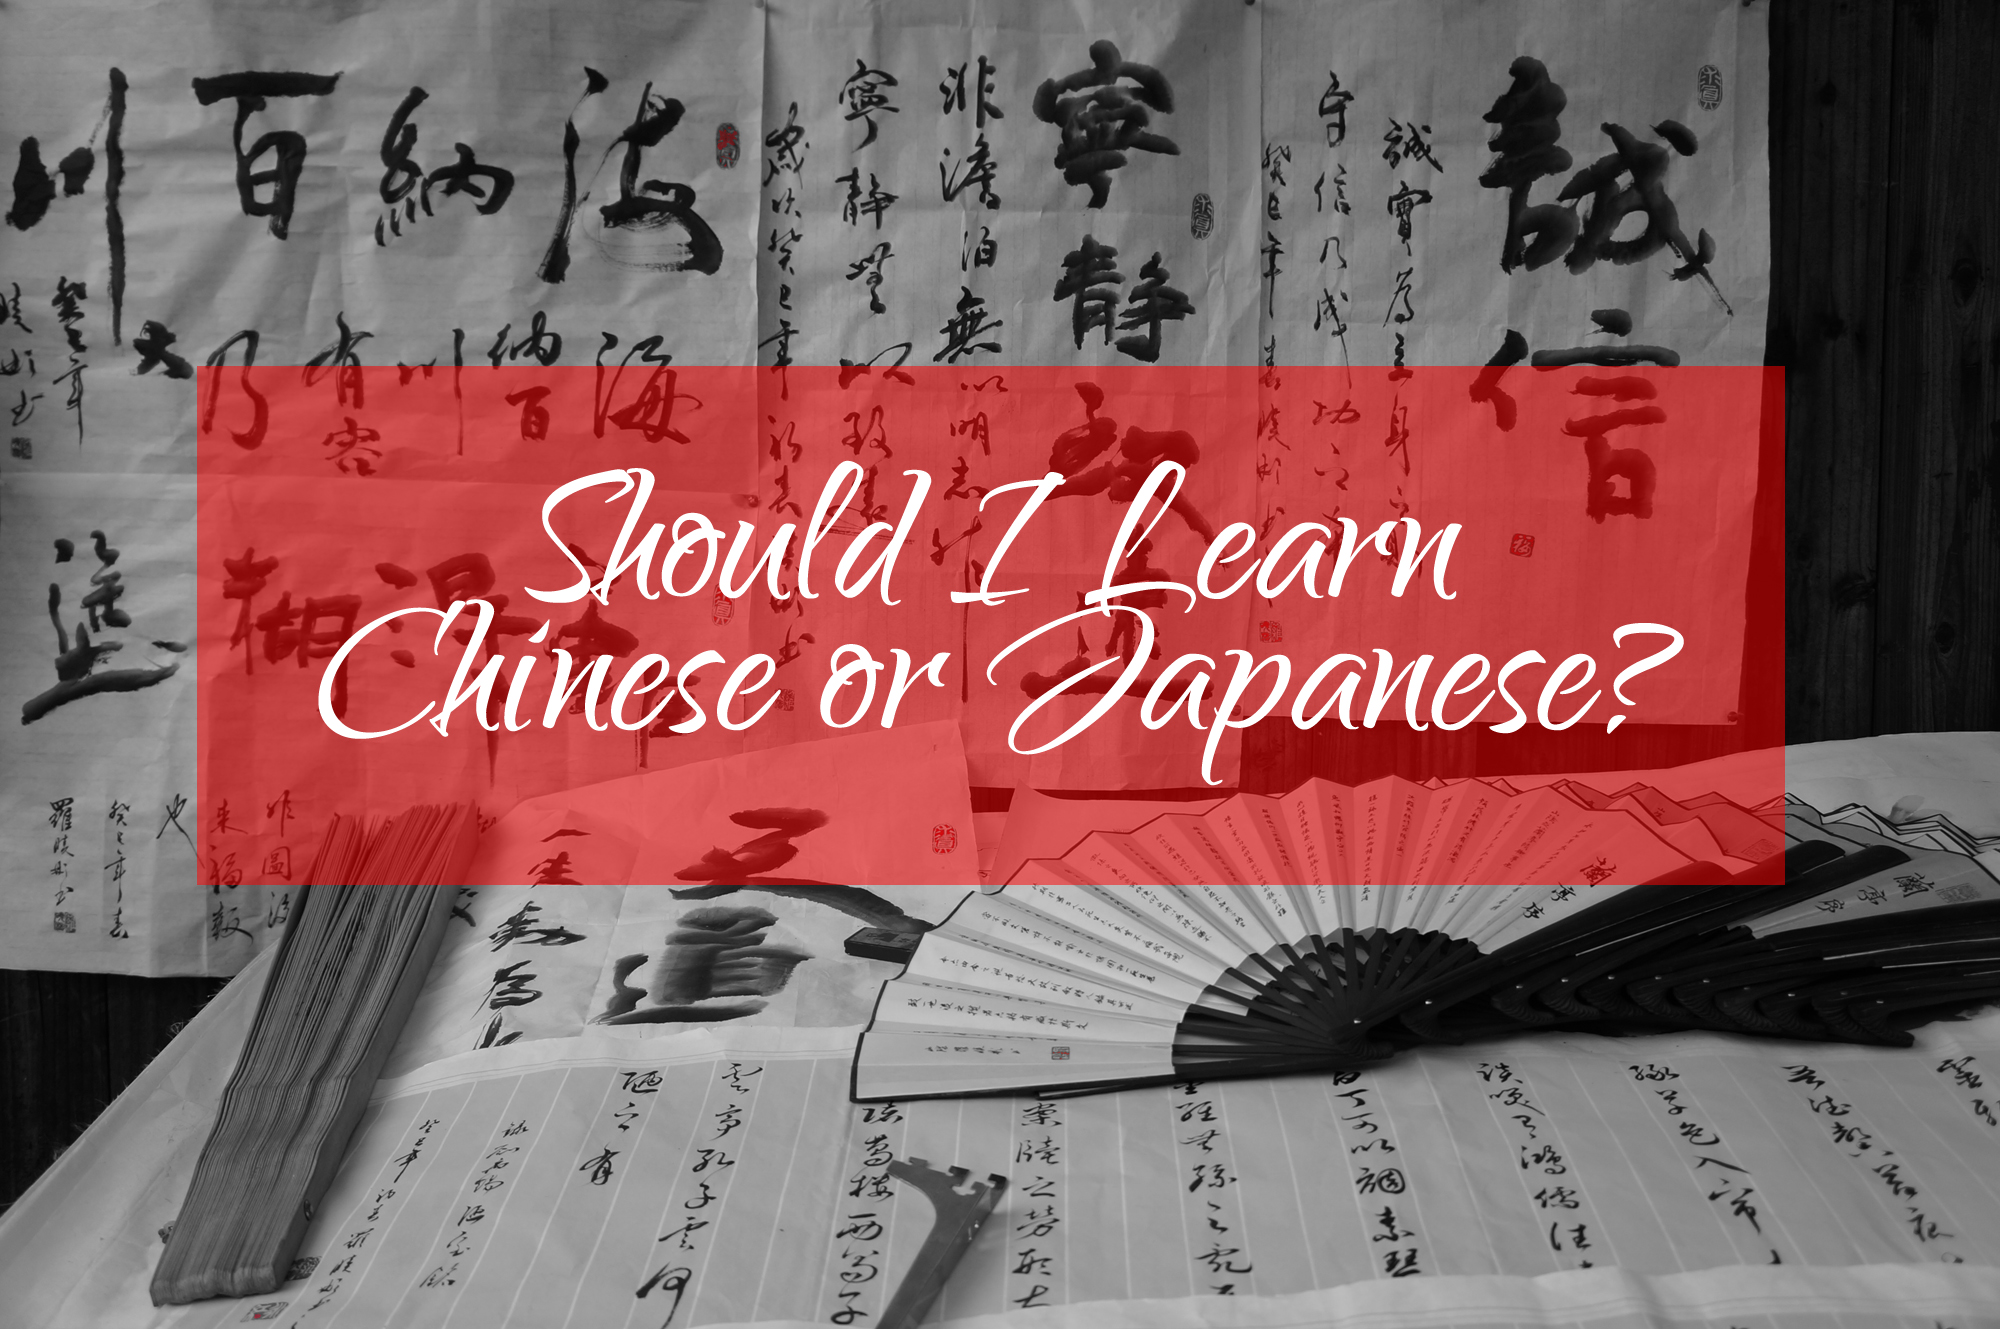 Should I start with Japanese or Chinese?